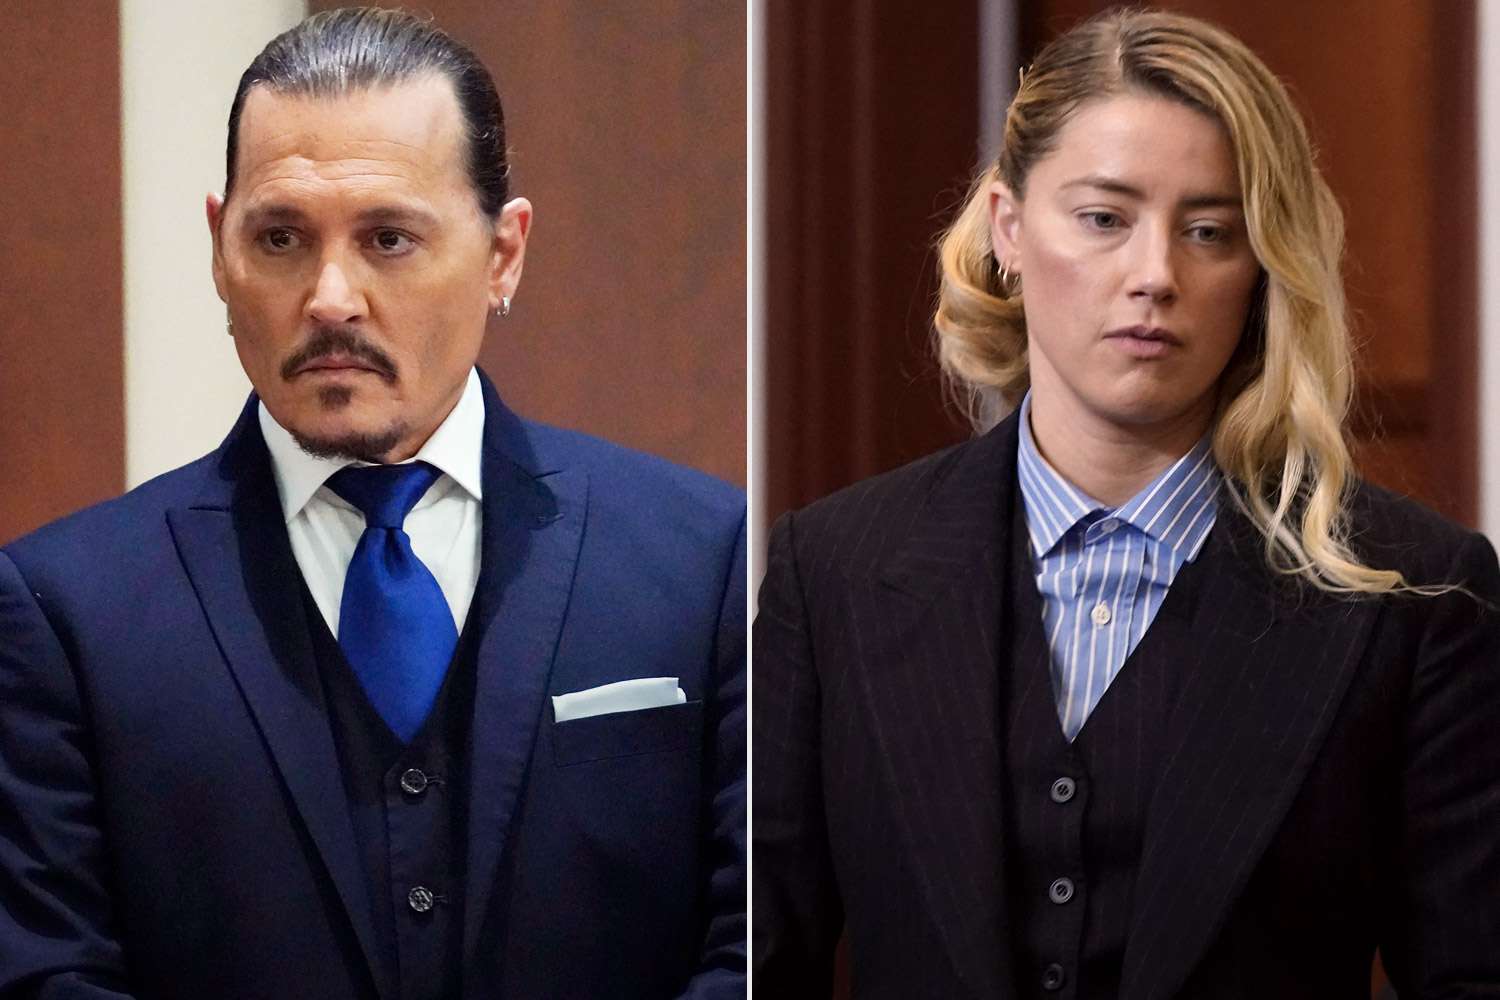 Johnny Depp testifies in the courtroom at the Fairfax County Circuit Courthouse in Fairfax, Virginia, April 25, 2022. - Actor Johnny Depp sued his ex-wife Amber Heard for libel in Fairfax County Circuit Court after she wrote an op-ed piece in The Washington Post in 2018 referring to herself as a "public figure representing domestic abuse." (Photo by Steve Helber / POOL / AFP) (Photo by STEVE HELBER/POOL/AFP via Getty Images); Amber Heard returns from recess at Fairfax County Circuit Court during a defamation case against her by ex-husband, actor Johnny Depp in Fairfax, Virginia, on May 4, 2022. - US actor Johnny Depp sued his ex-wife Amber Heard for libel in Fairfax County Circuit Court after she wrote an op-ed piece in The Washington Post in 2018 referring to herself as a "public figure representing domestic abuse." (Photo by ELIZABETH FRANTZ / POOL / AFP) (Photo by ELIZABETH FRANTZ/POOL/AFP via Getty Images)